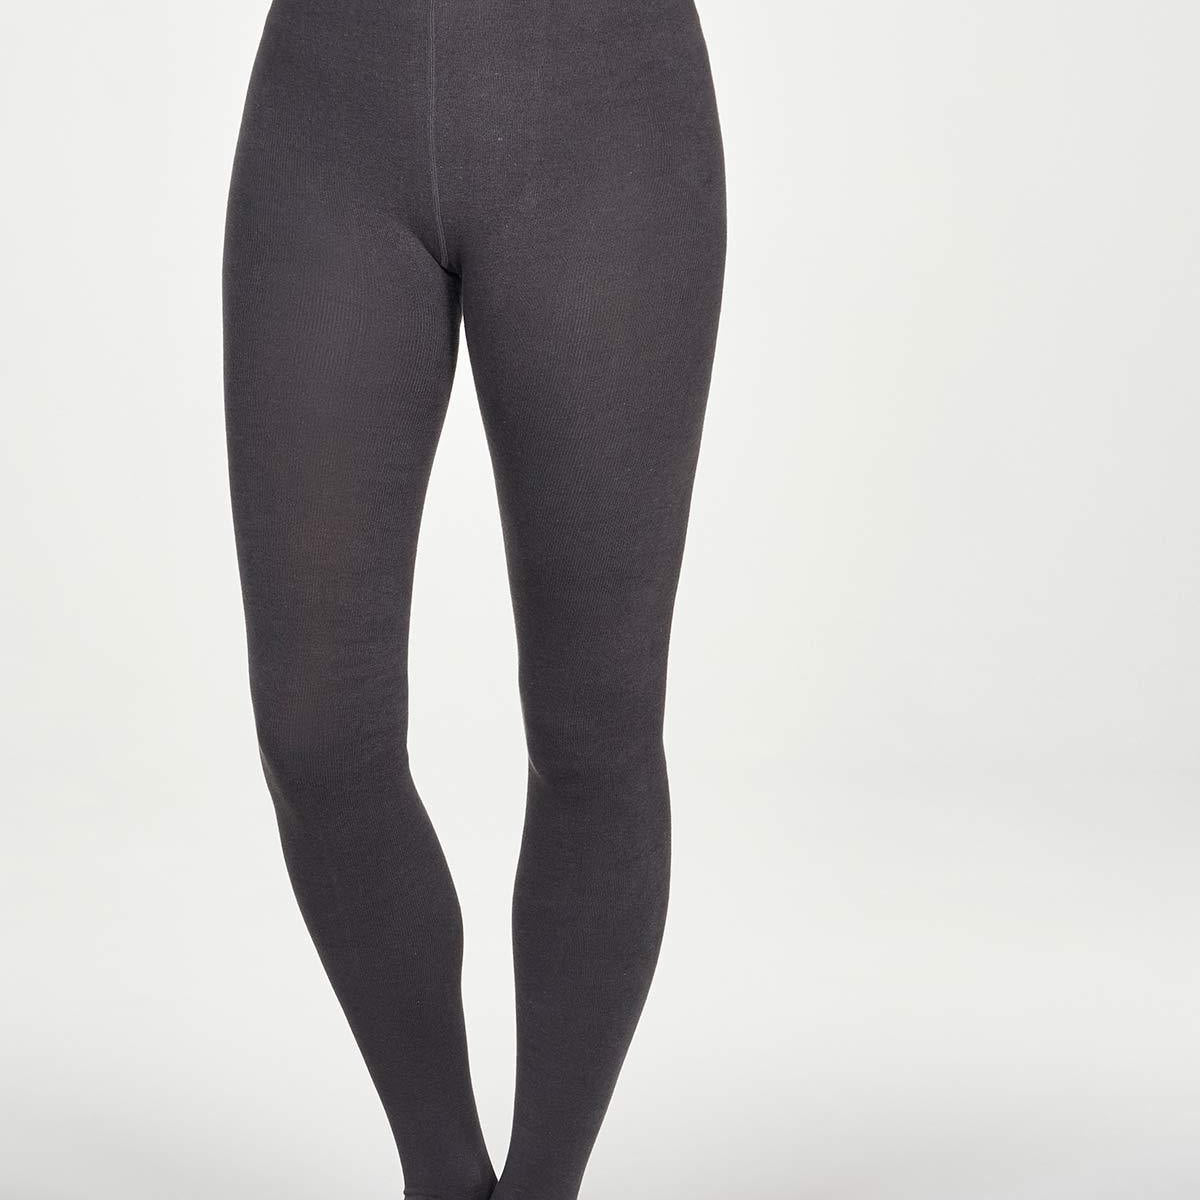 Buy Only Dark Grey High Rise Tights for Women's Online @ Tata CLiQ